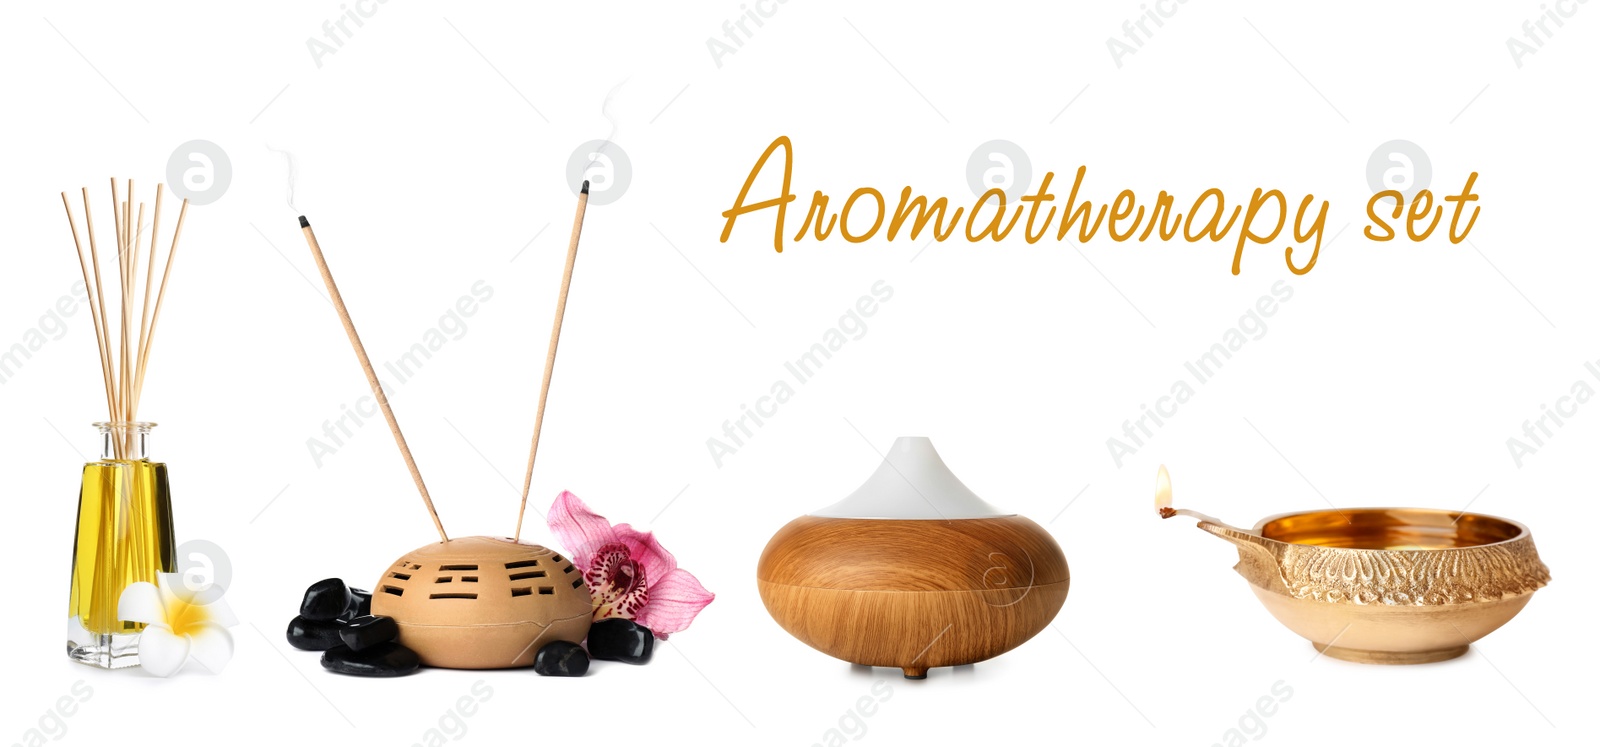 Image of Incense sticks and other items for aromatherapy on white background, collage. Banner design